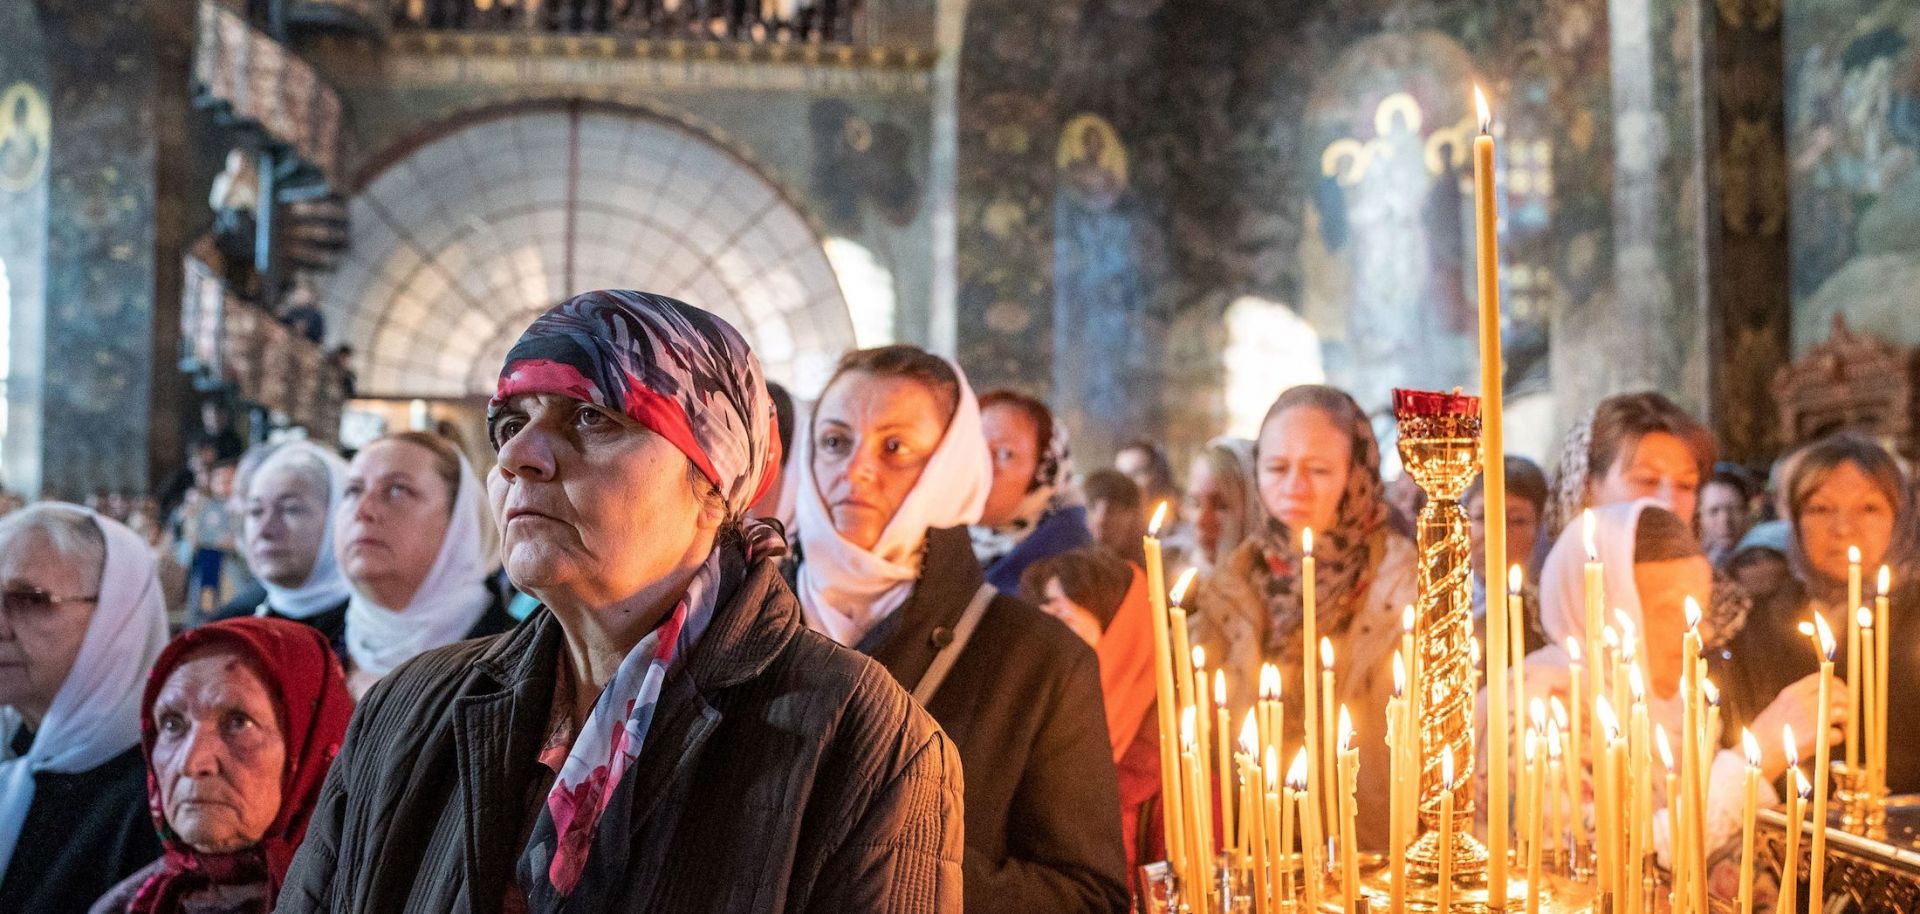 Worshippers attend a service at the Kiev-Pechersk Lavra in Ukraine during October.